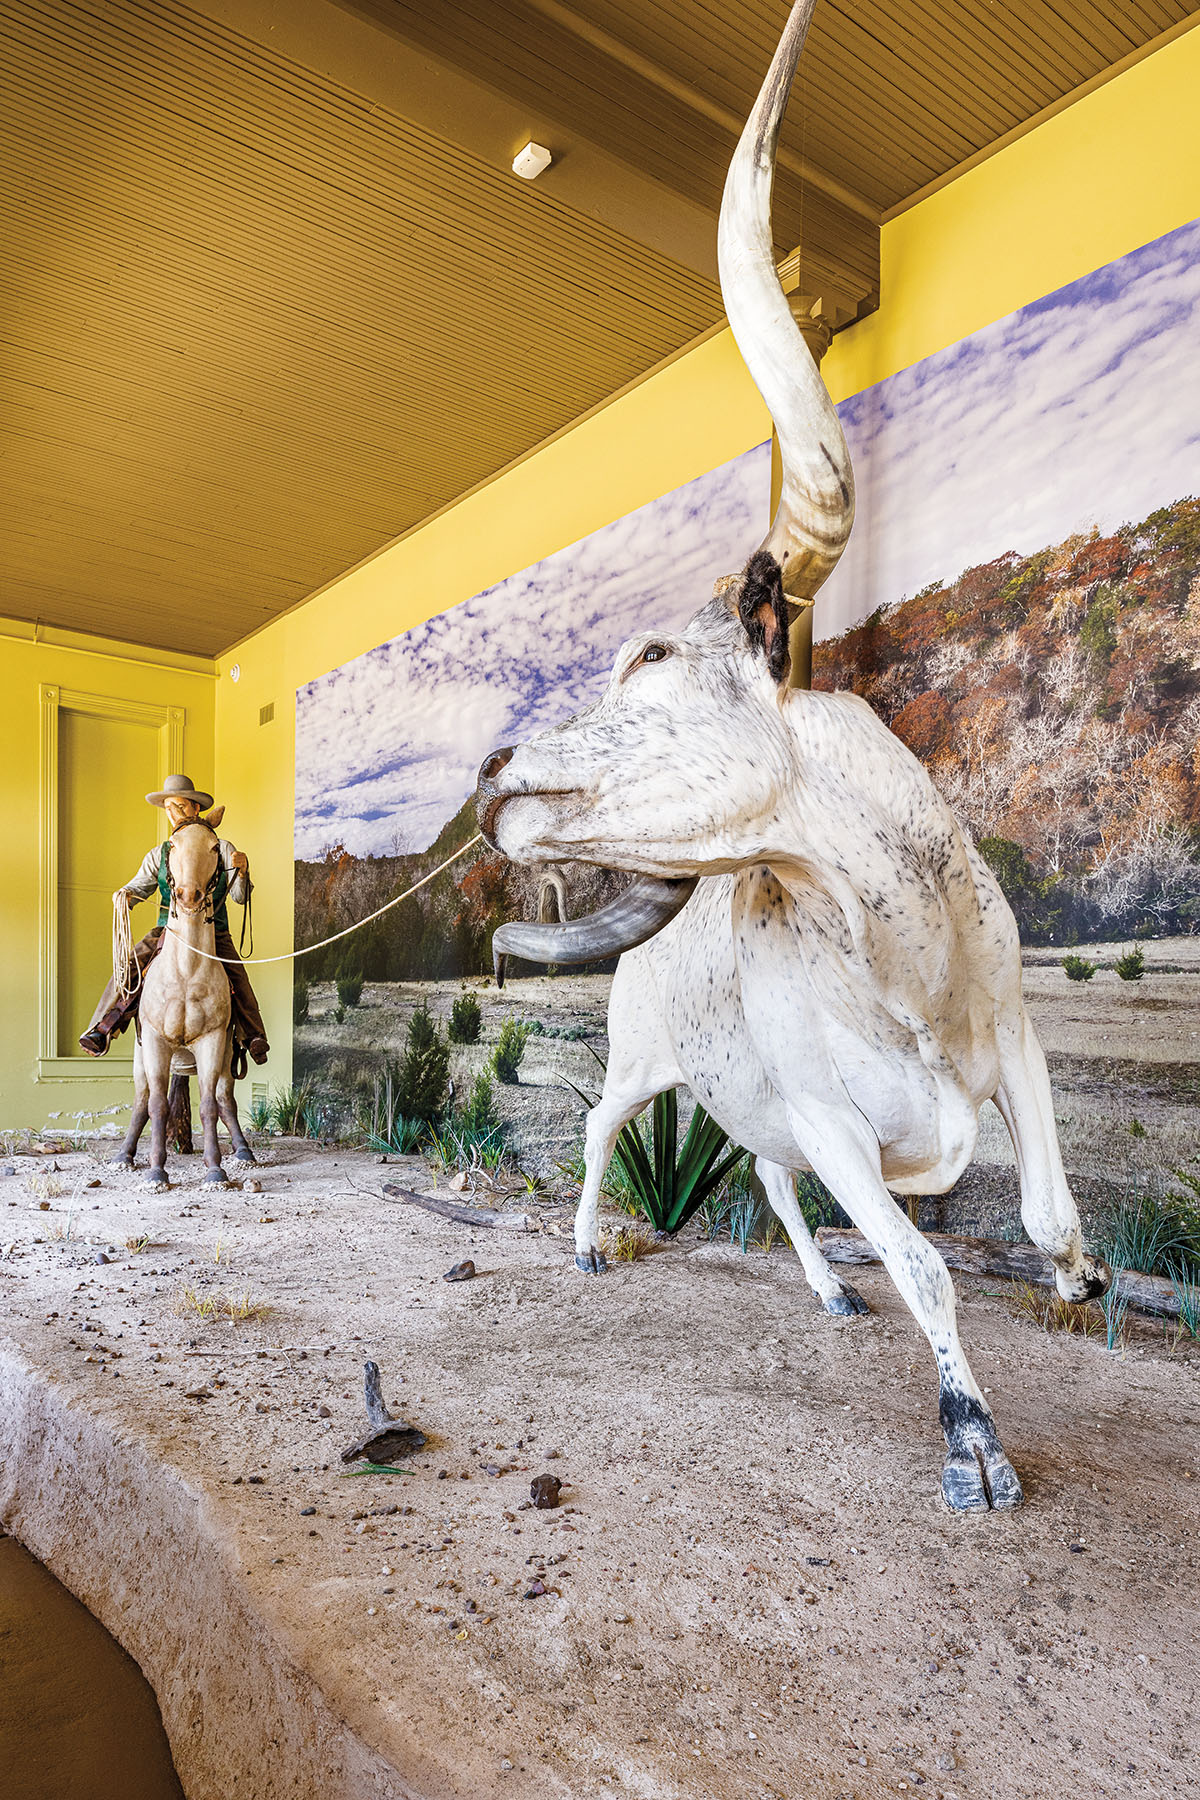 A taxidermy longhorn in front of a large photograph and yellow paint